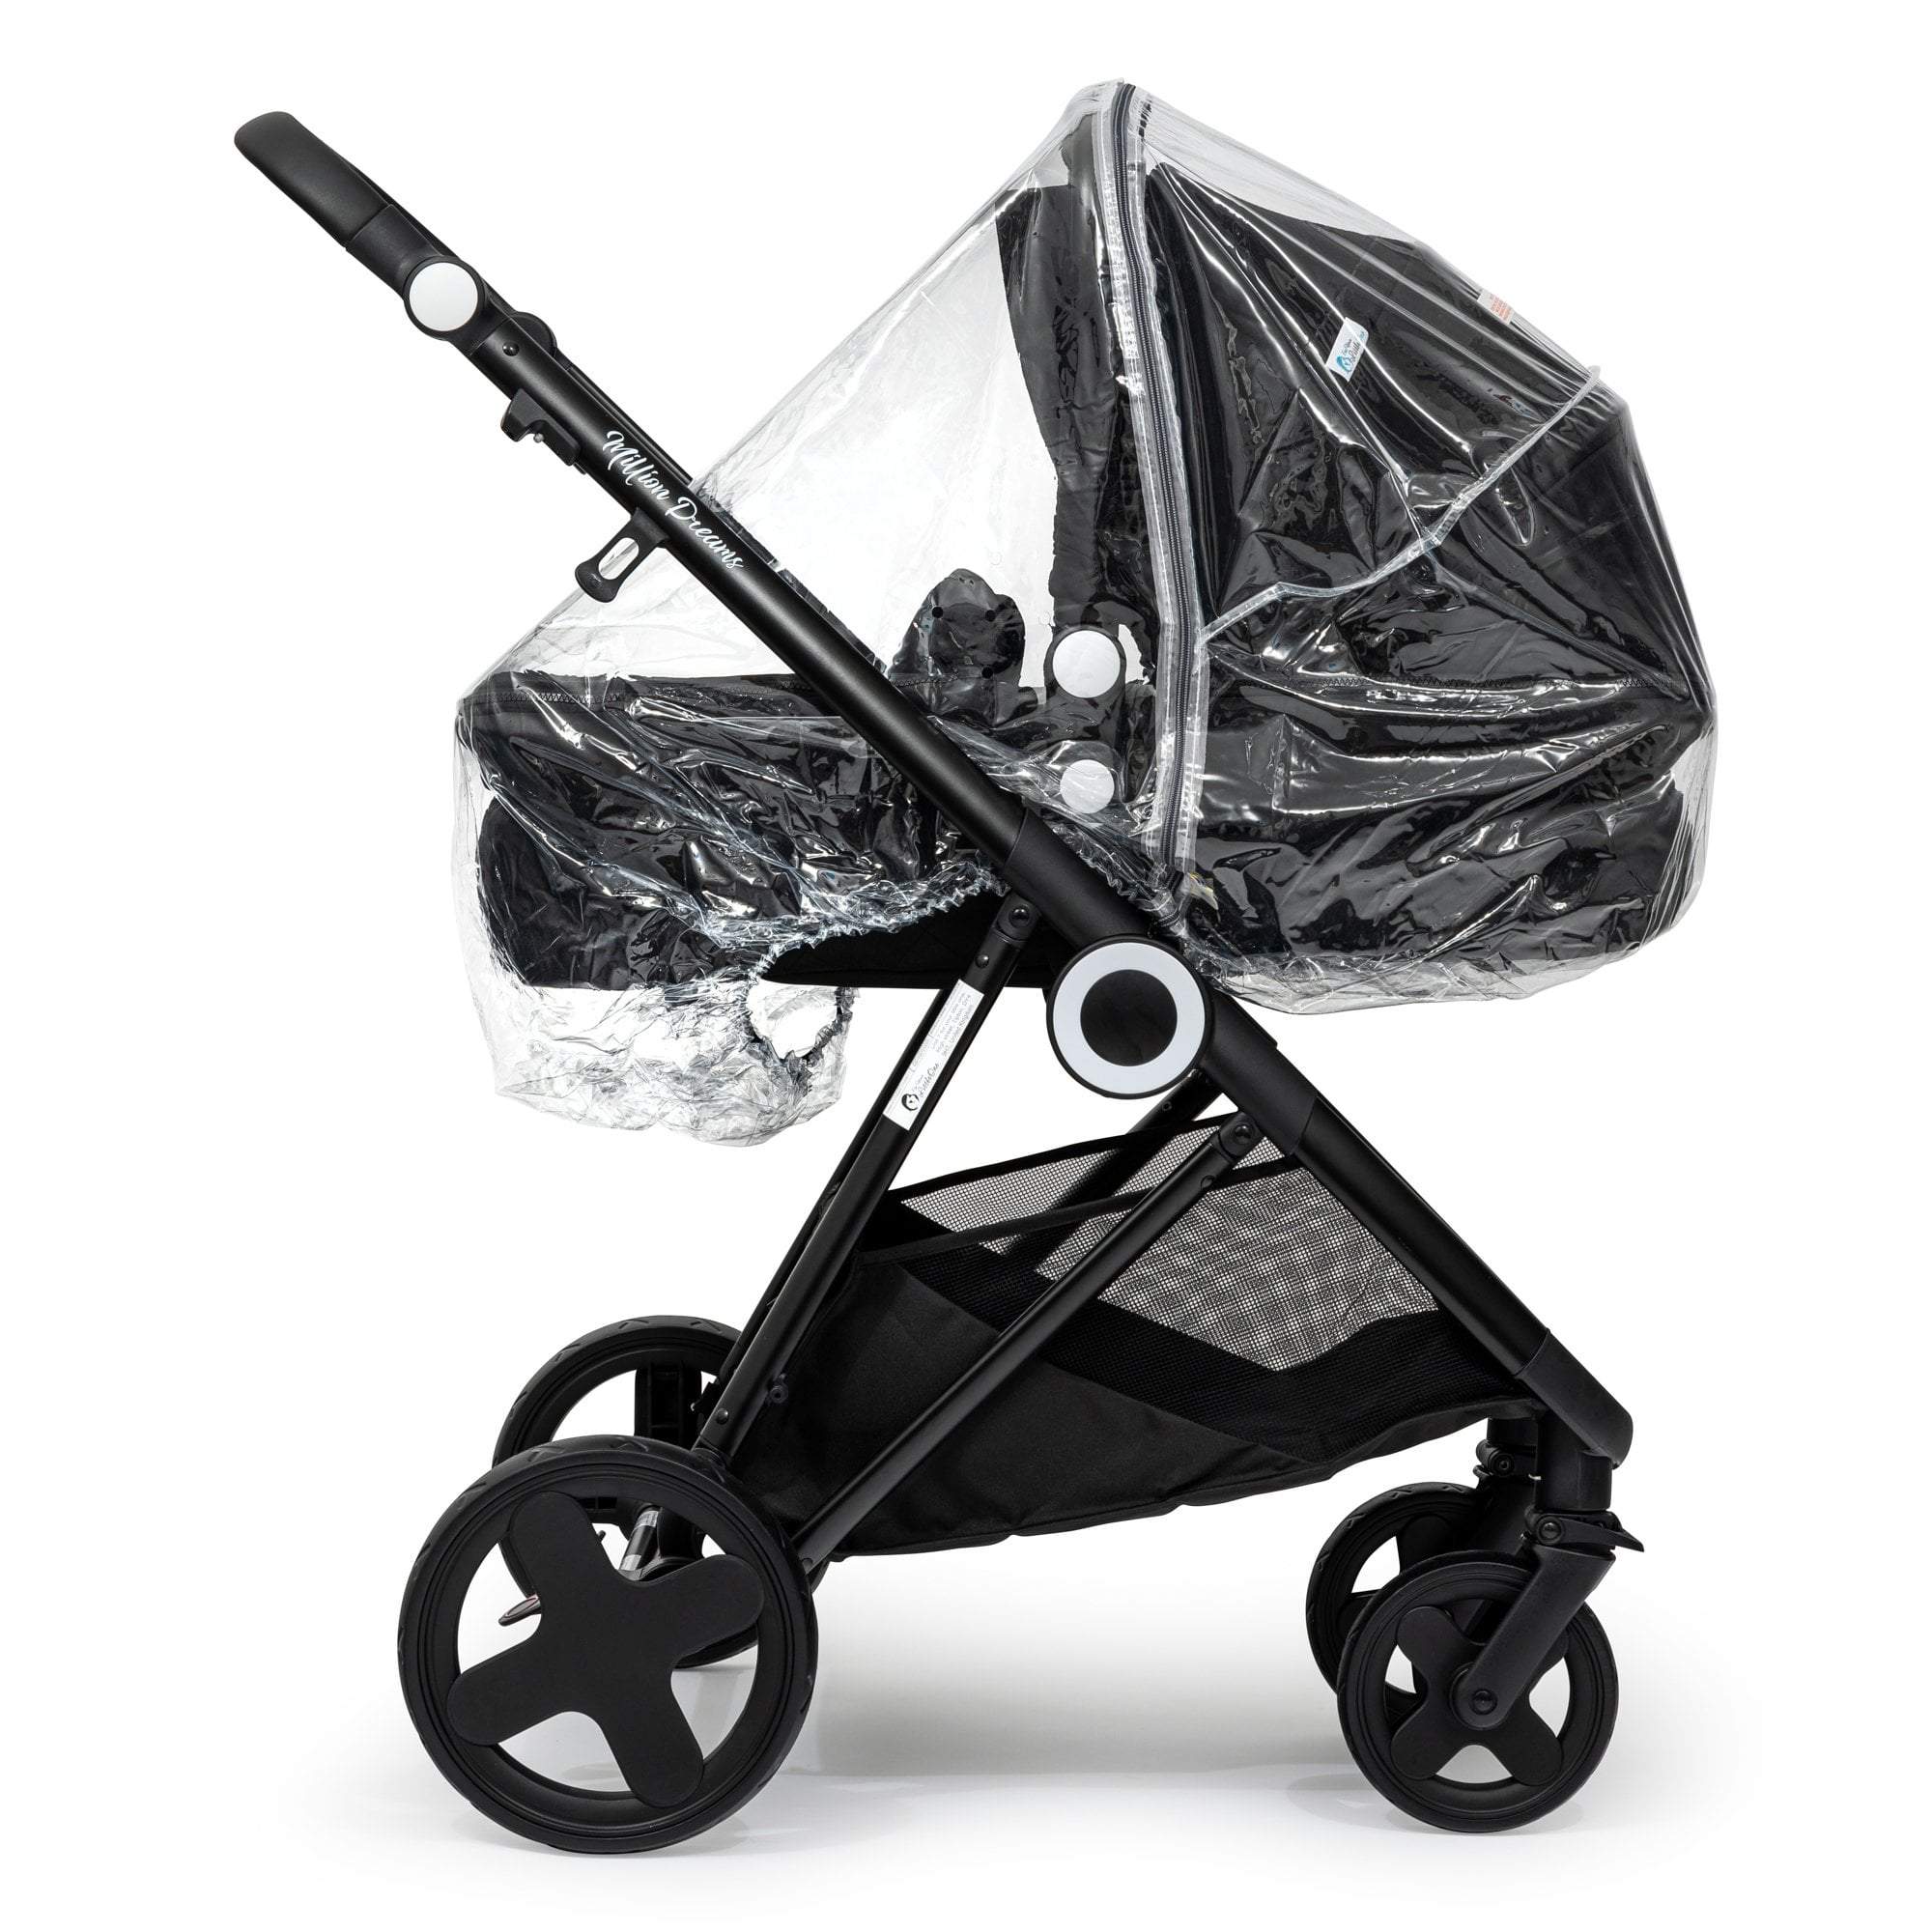 Carrycot Raincover Compatible With Bumbleride - Fits All Models - For Your Little One